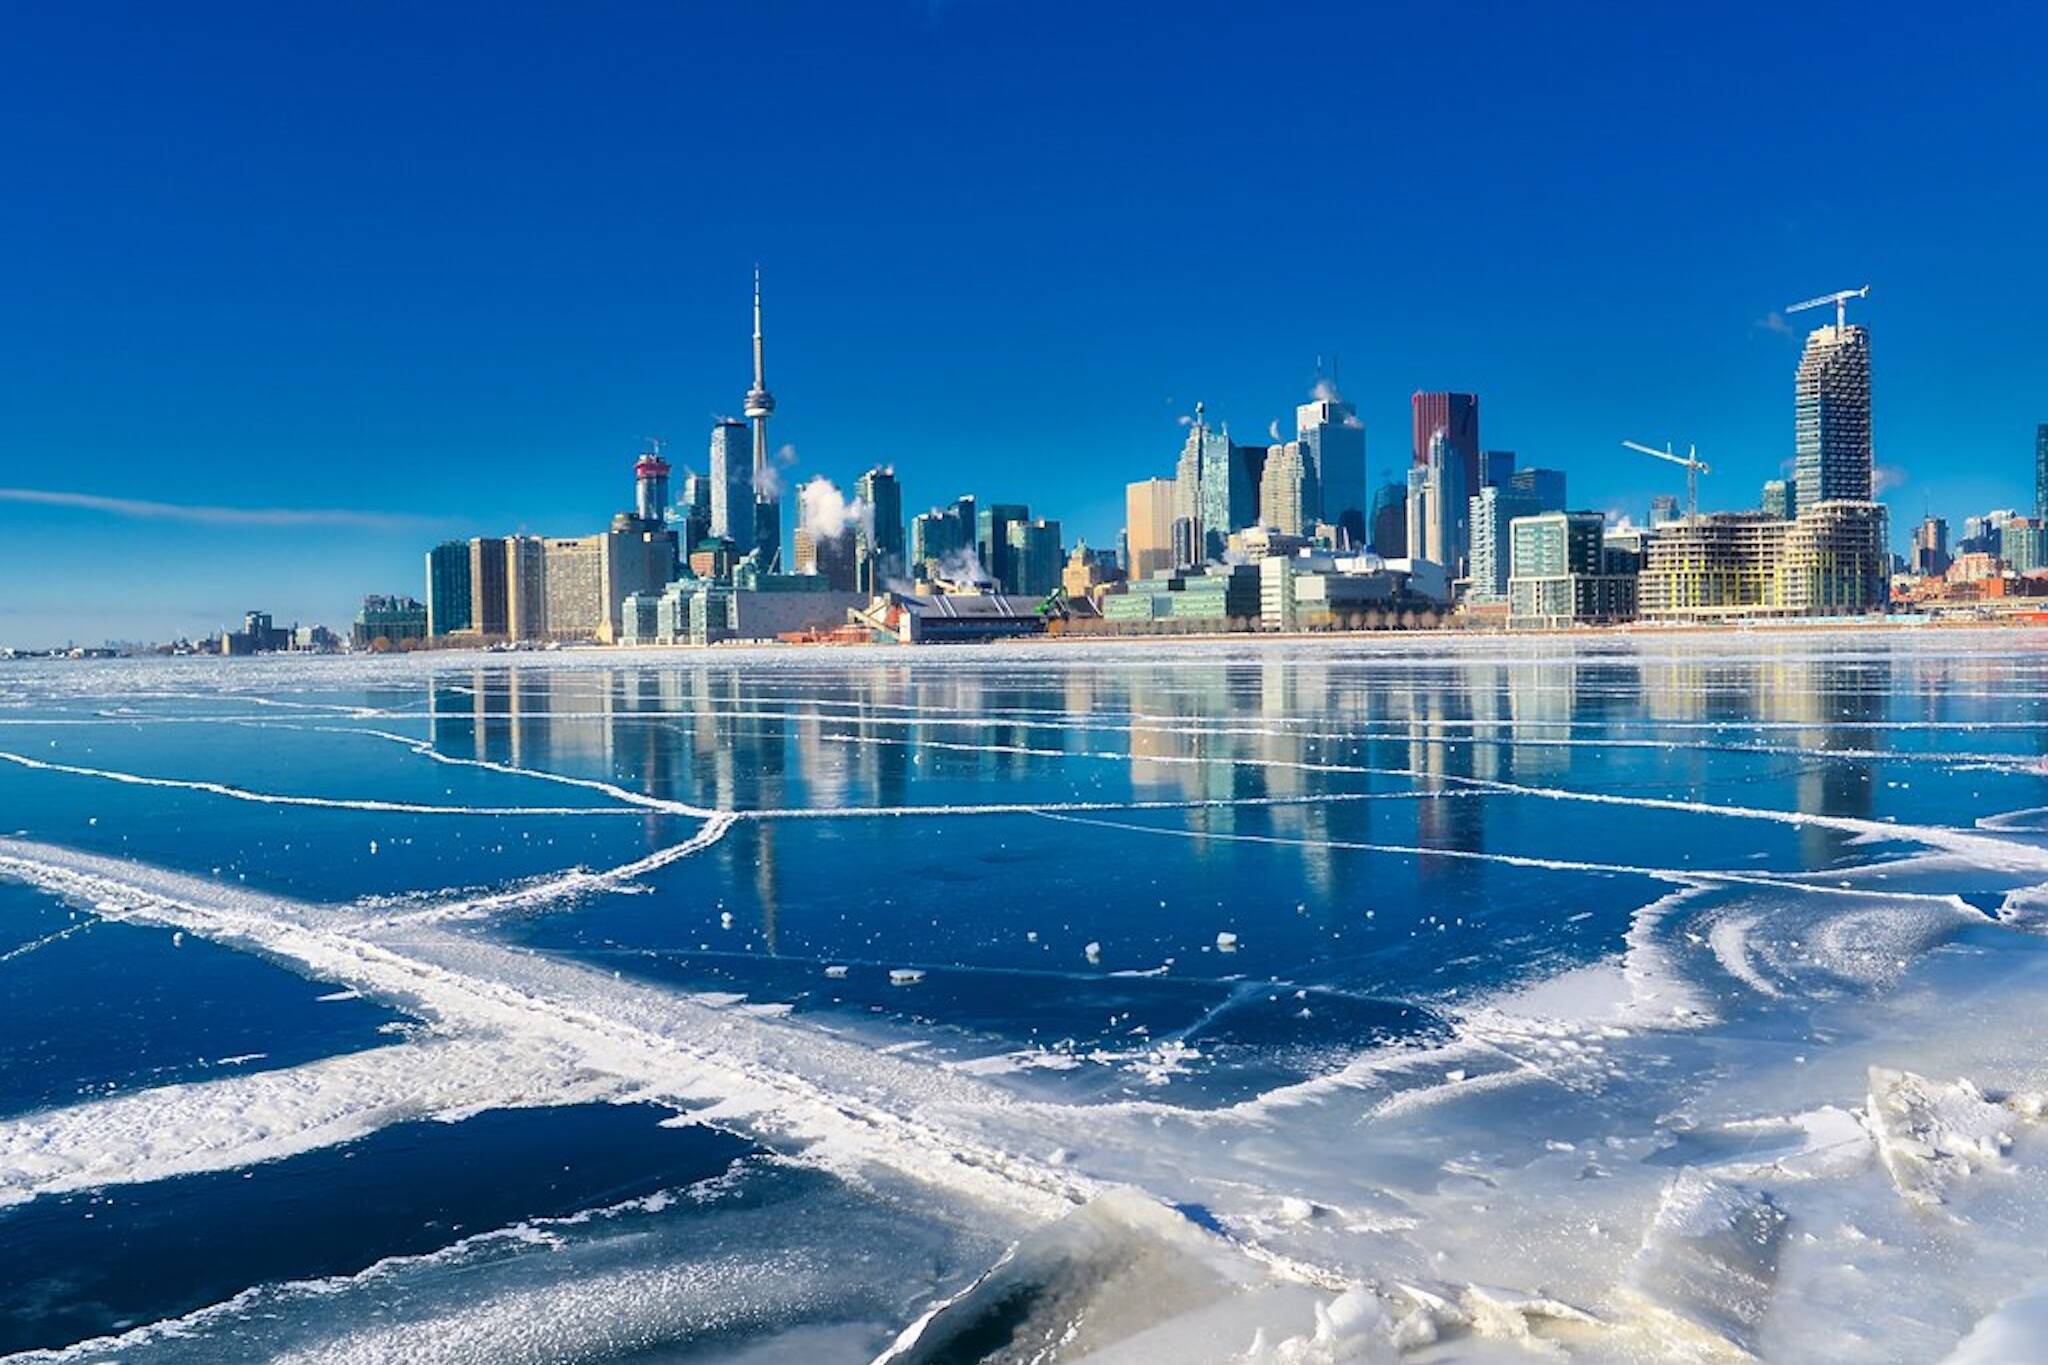 Ontario's winter forecast calls for stupid cold temperatures and heaps